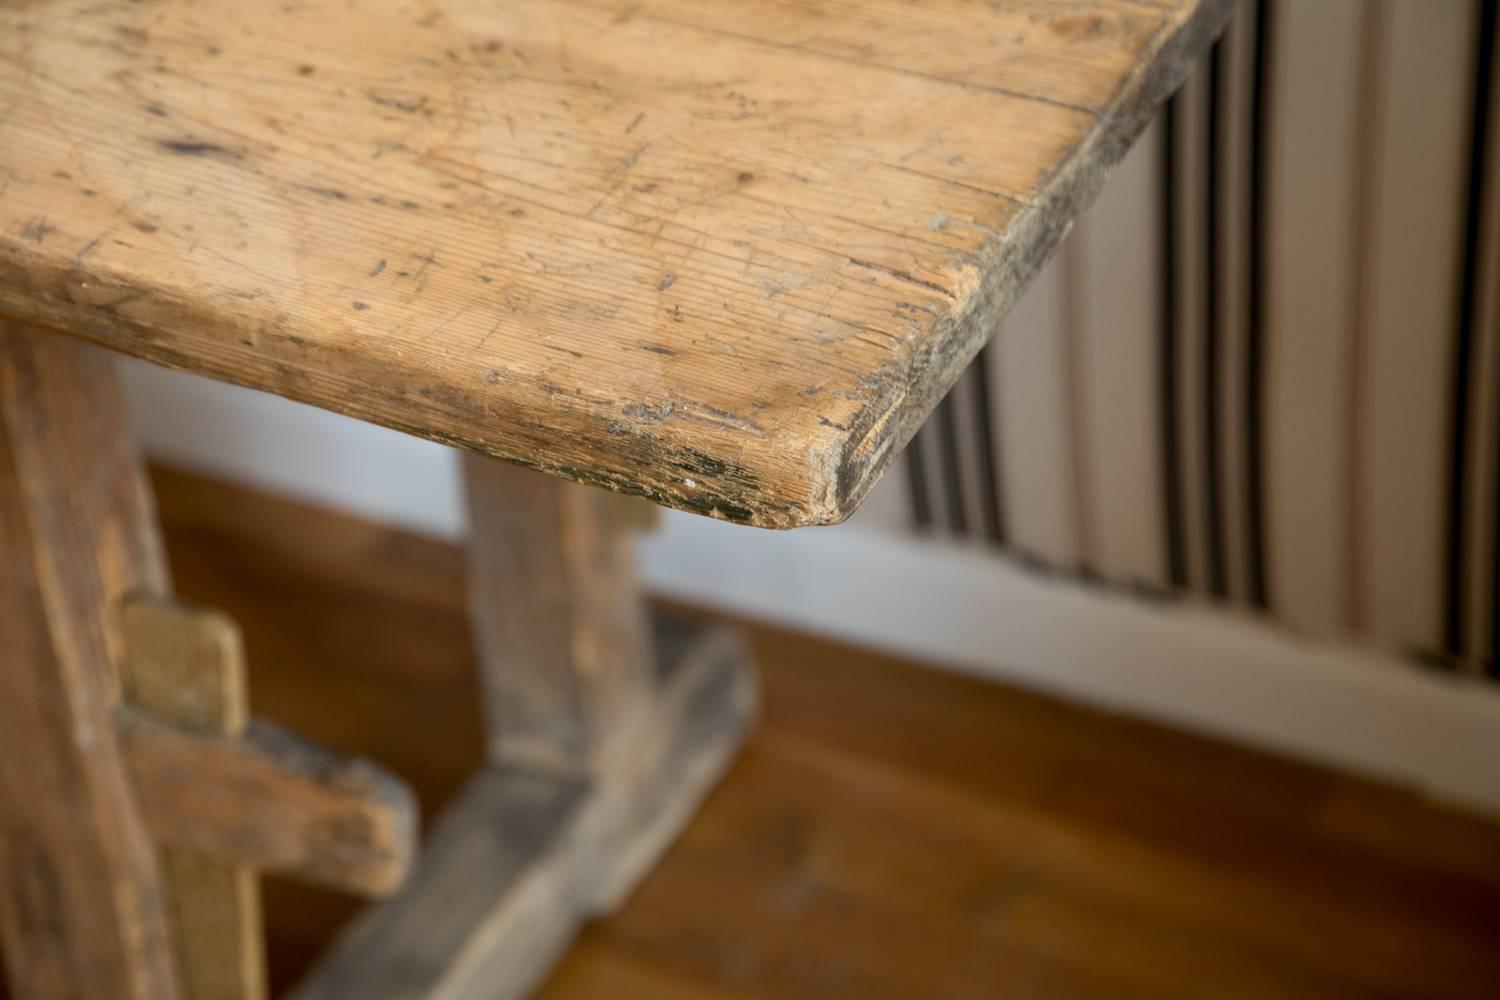 Terrific shape to this rustic old pine farm table.